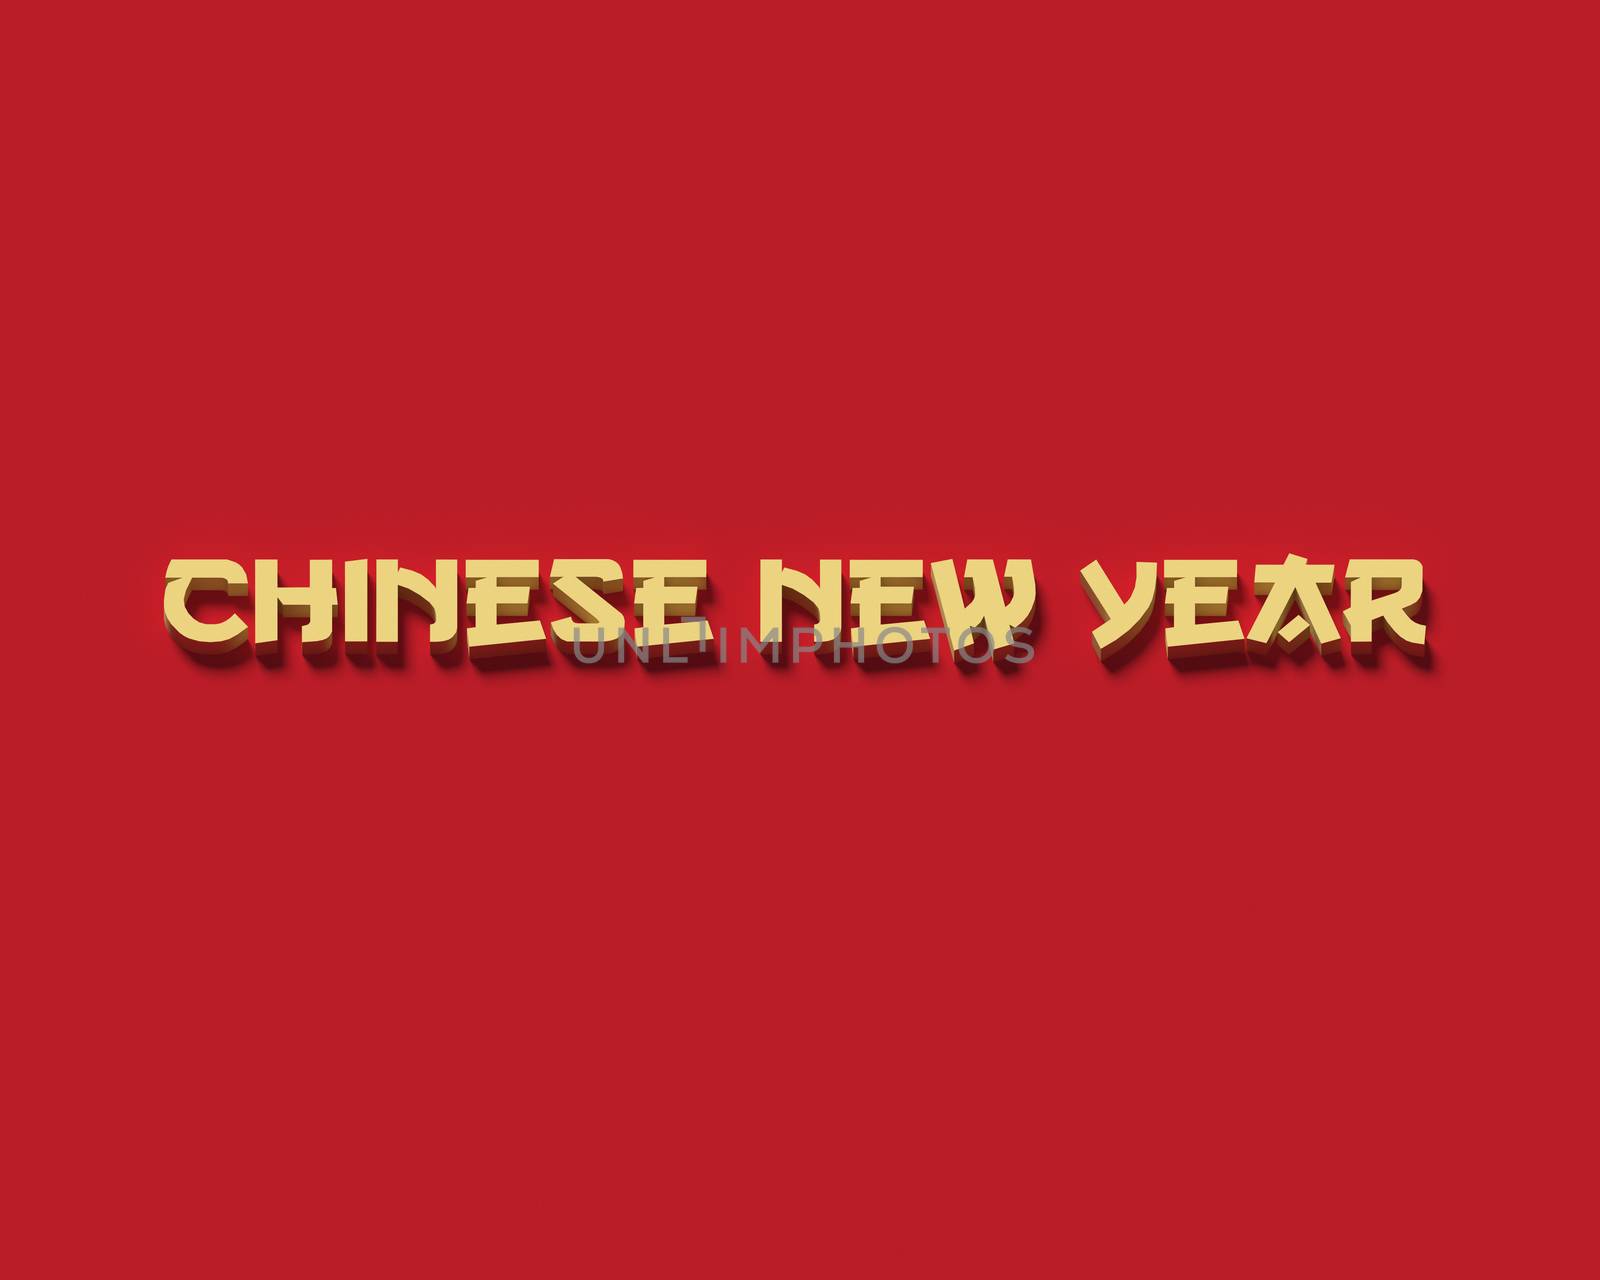 3D WORDS 'CHINESE NEW YEAR' ON PLAIN BACKGROUND by PrettyTG